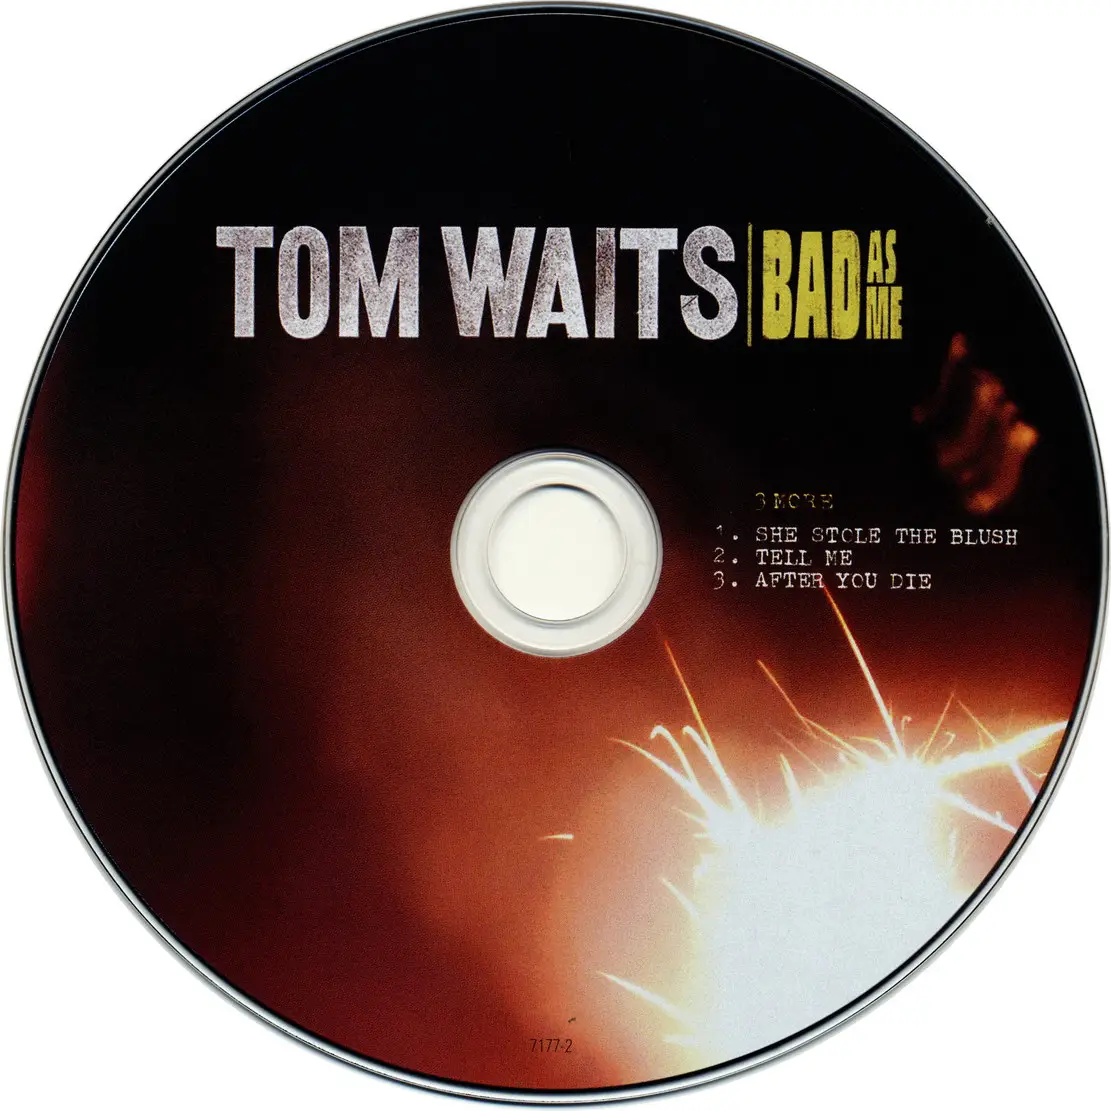 Tom Waits - Bad As Me (2011) 2CD Anti, Deluxe Limited Edition re-up.